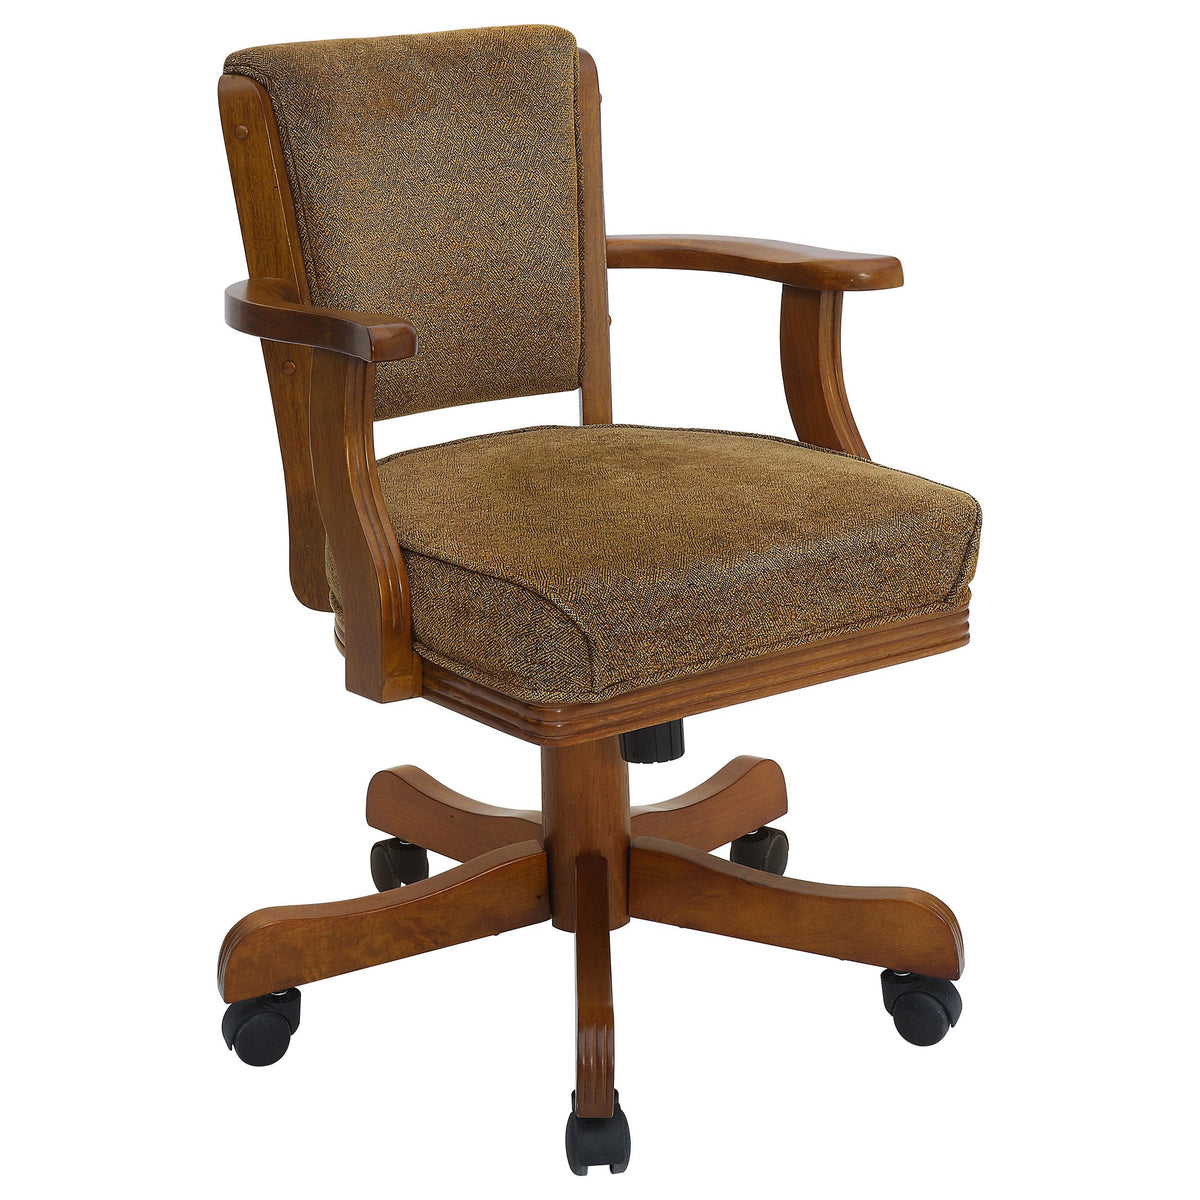 Mitchell Upholstered Game Chair Olive-brown and Amber Mitchell Upholstered Game Chair Olive-brown and Amber Half Price Furniture